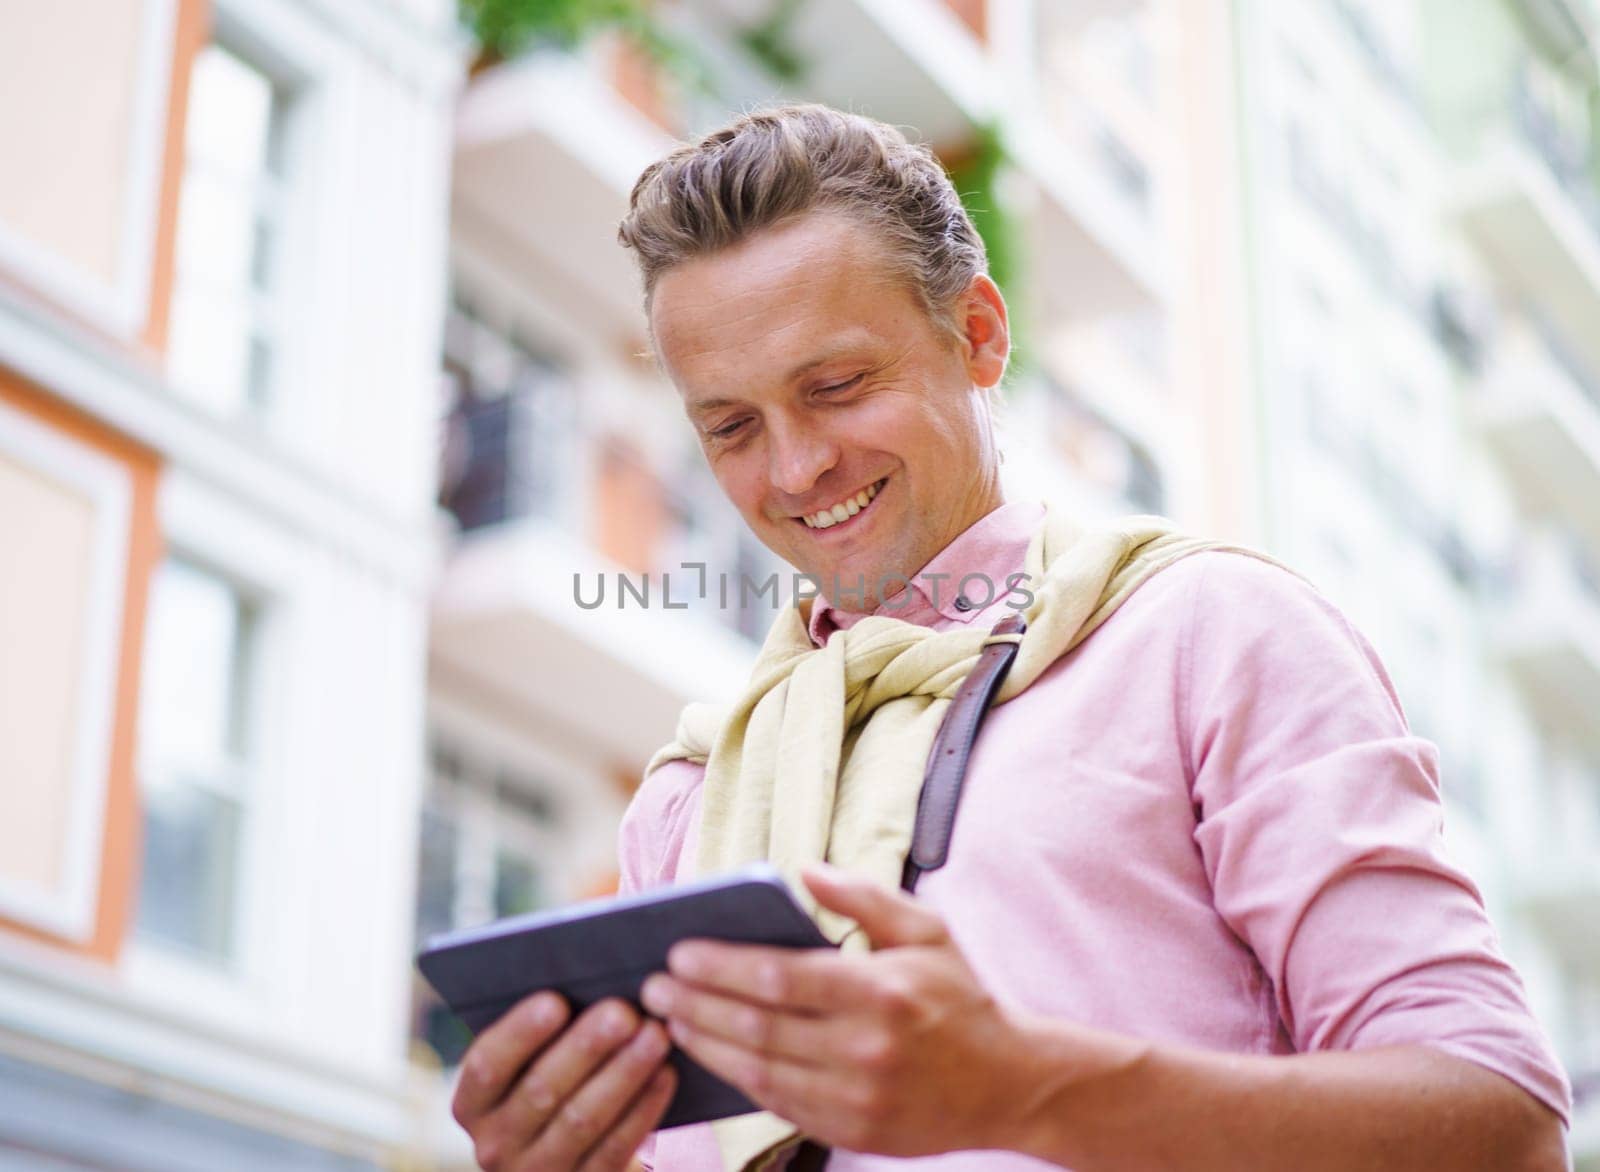 Happy man reading latest news articles from tablet PC while being outdoors on city street. Tablet PC in his hands allows him to access the latest information and stay up-to-date with current events. by LipikStockMedia